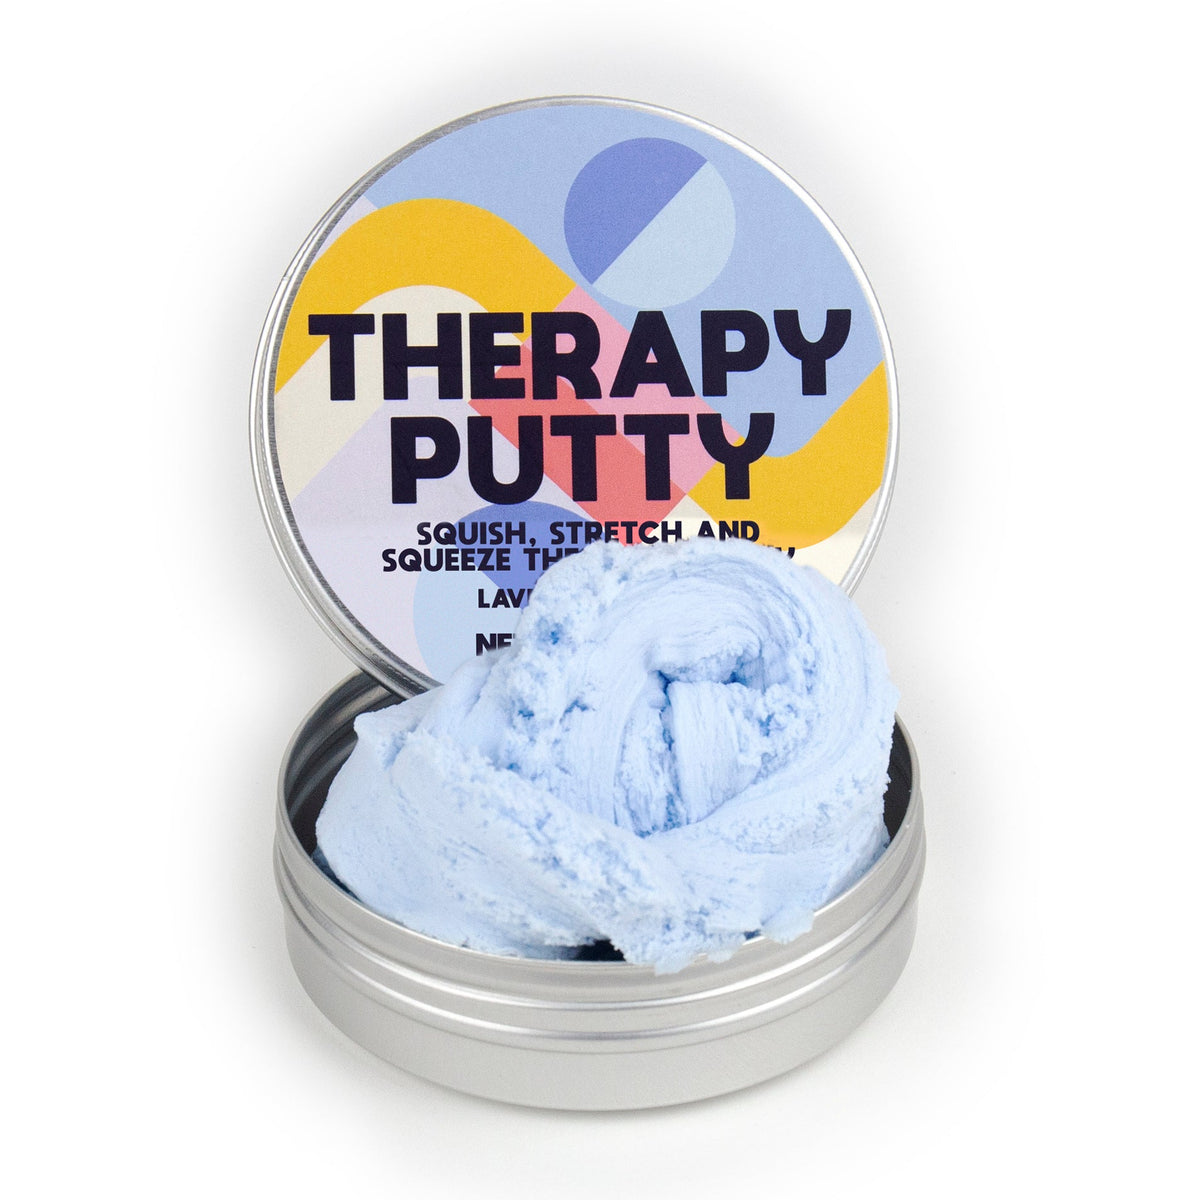 Kikkerland Therapy Putty | Open | Unique Gift Ideas for Her | for Mom | for Women | for Females | for Wife | for Sister | for Girlfriend | for Grandma | for Friends | for Birthday | Gifting Made Simple | Unique Gift Ideas for Him | for Dad | for Men | for Males | for Husband | for Brother | for Boyfriend | for Grandad